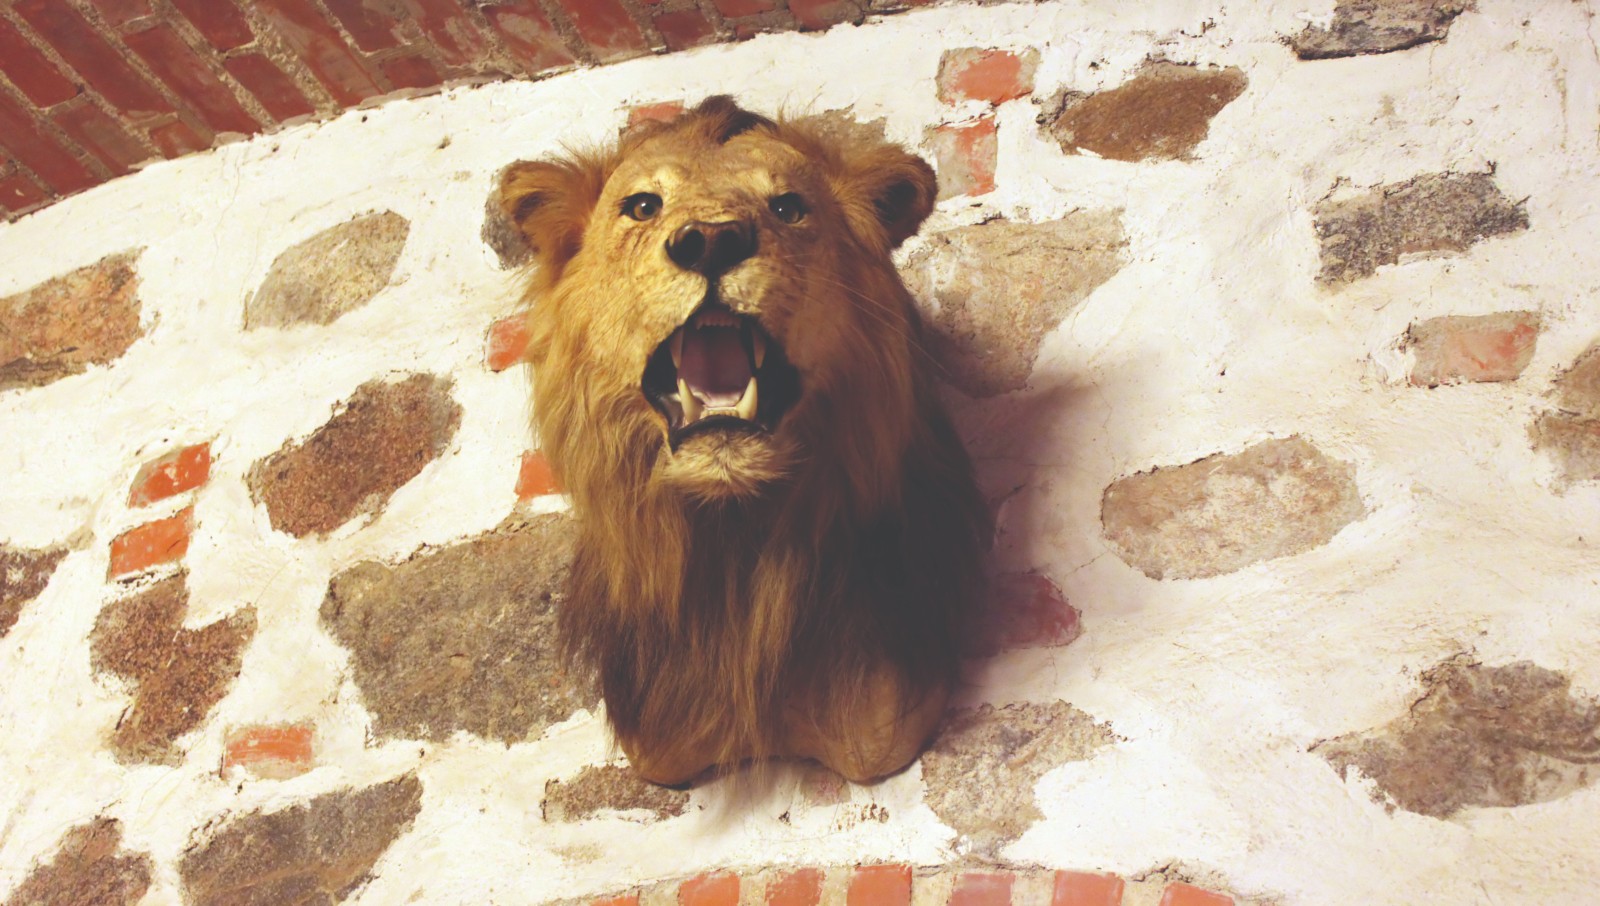 A photo of a lion's head mounted on a wall